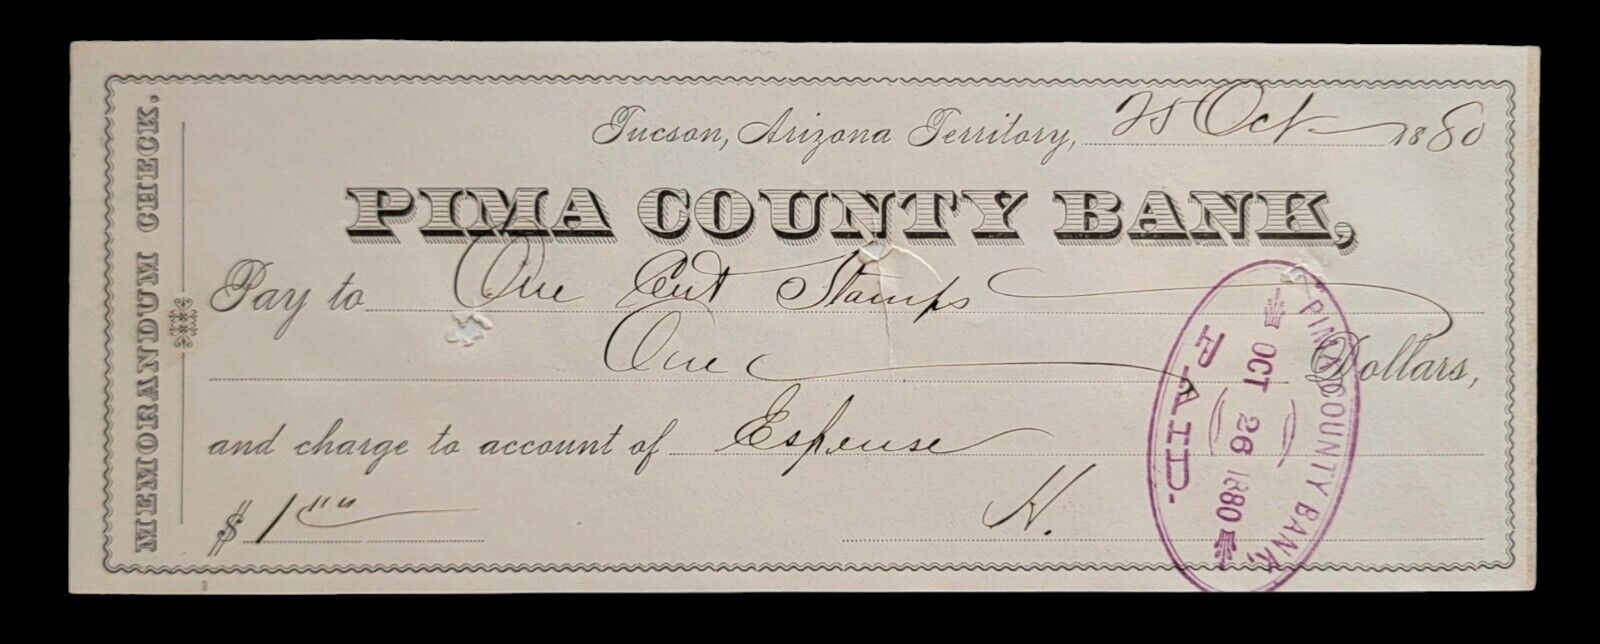 Pima County Bank Tuscon Arizona Territory Check Pay To: One Cent Stamps Unusual